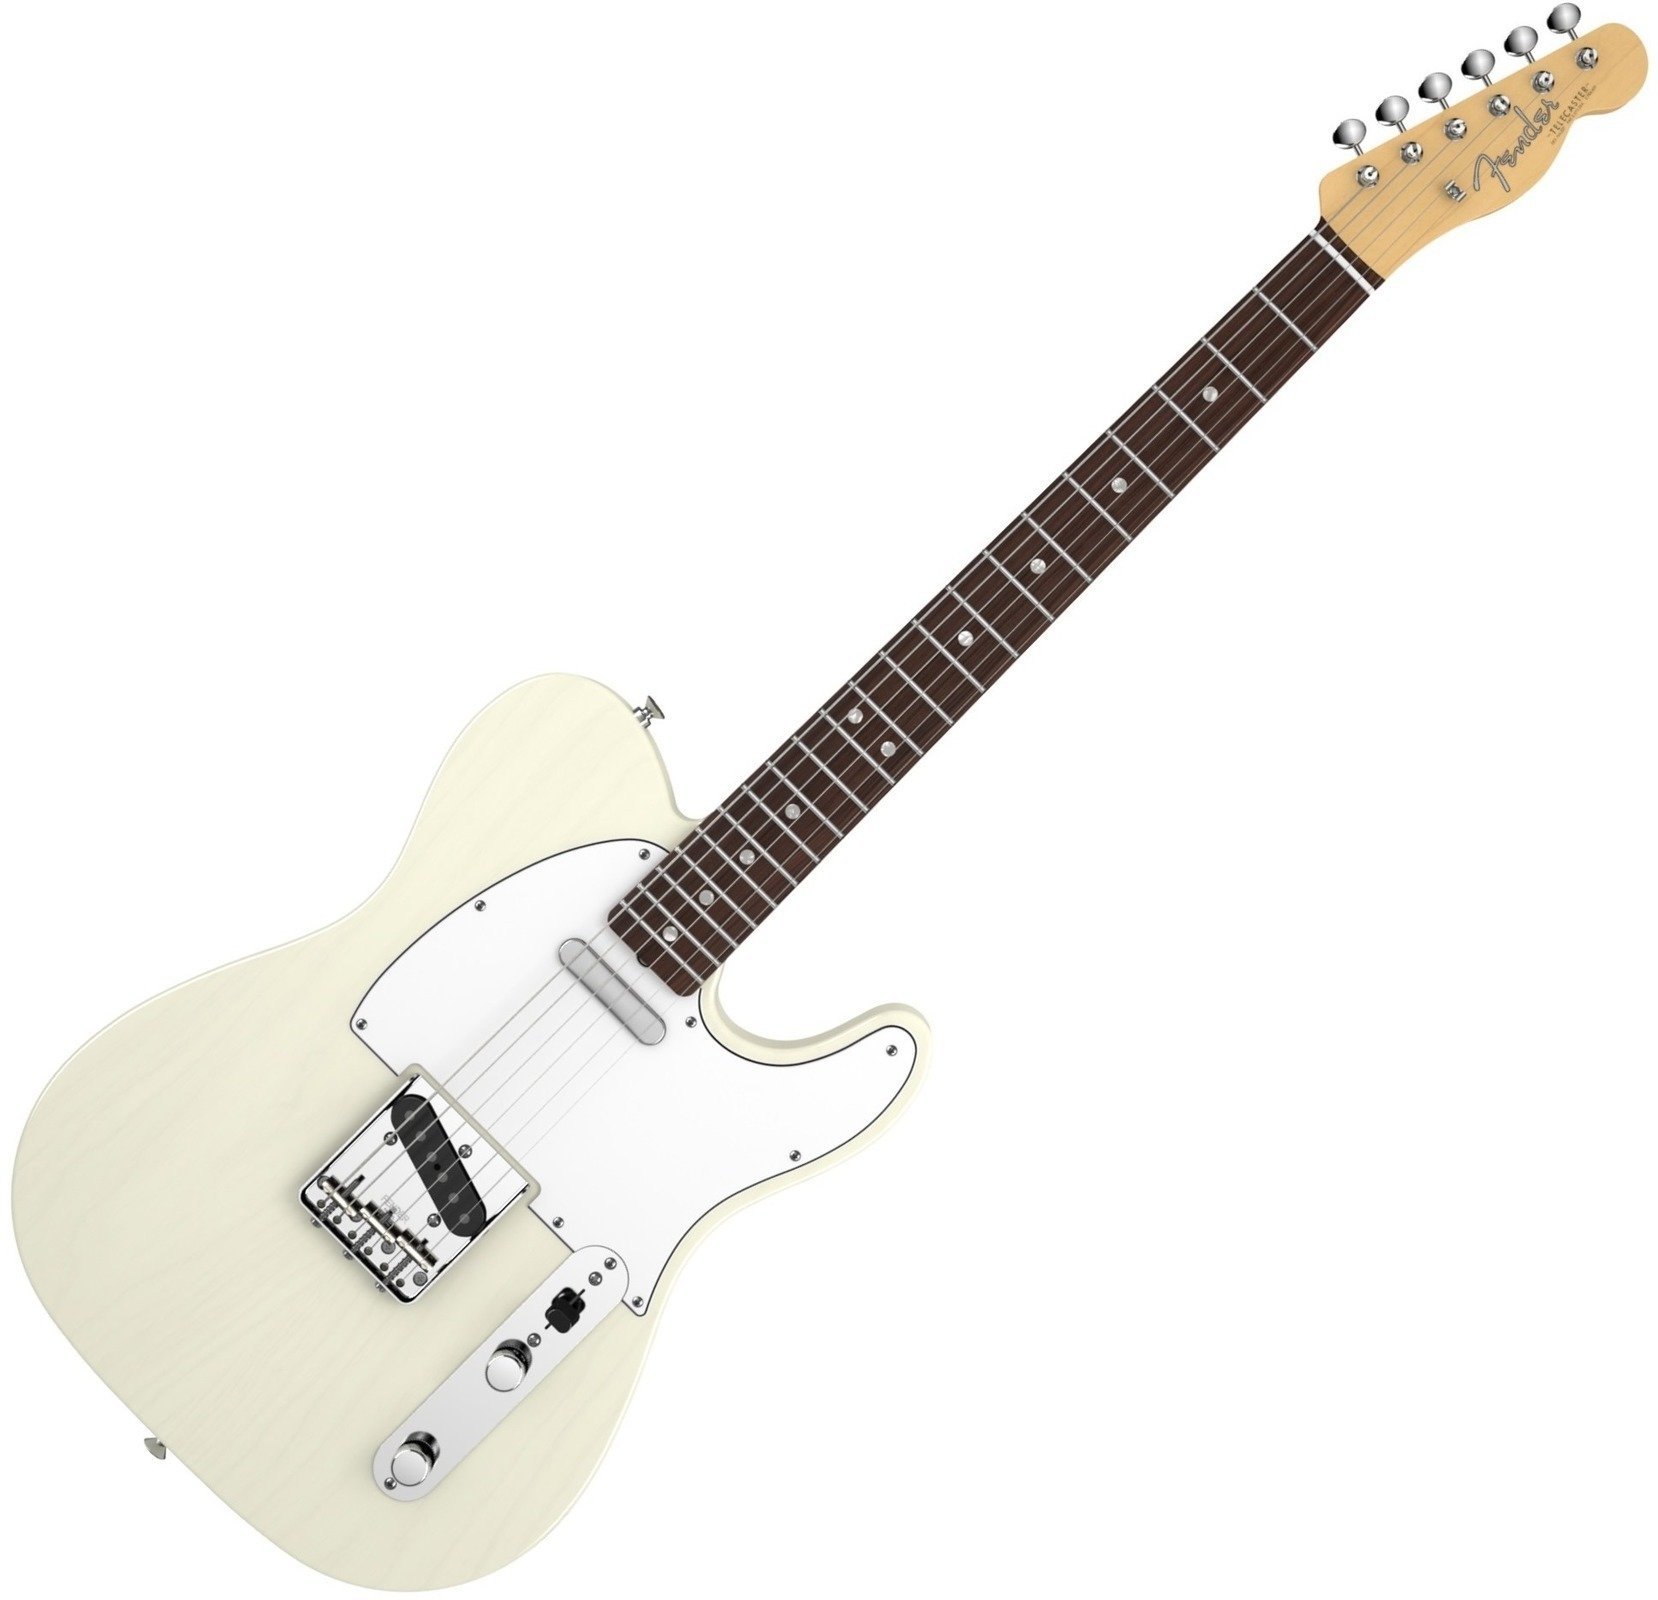 Electric guitar Fender American Vintage '64 Telecaster, Round-Lam Rosewood Fingerboard, Aged White Blonde